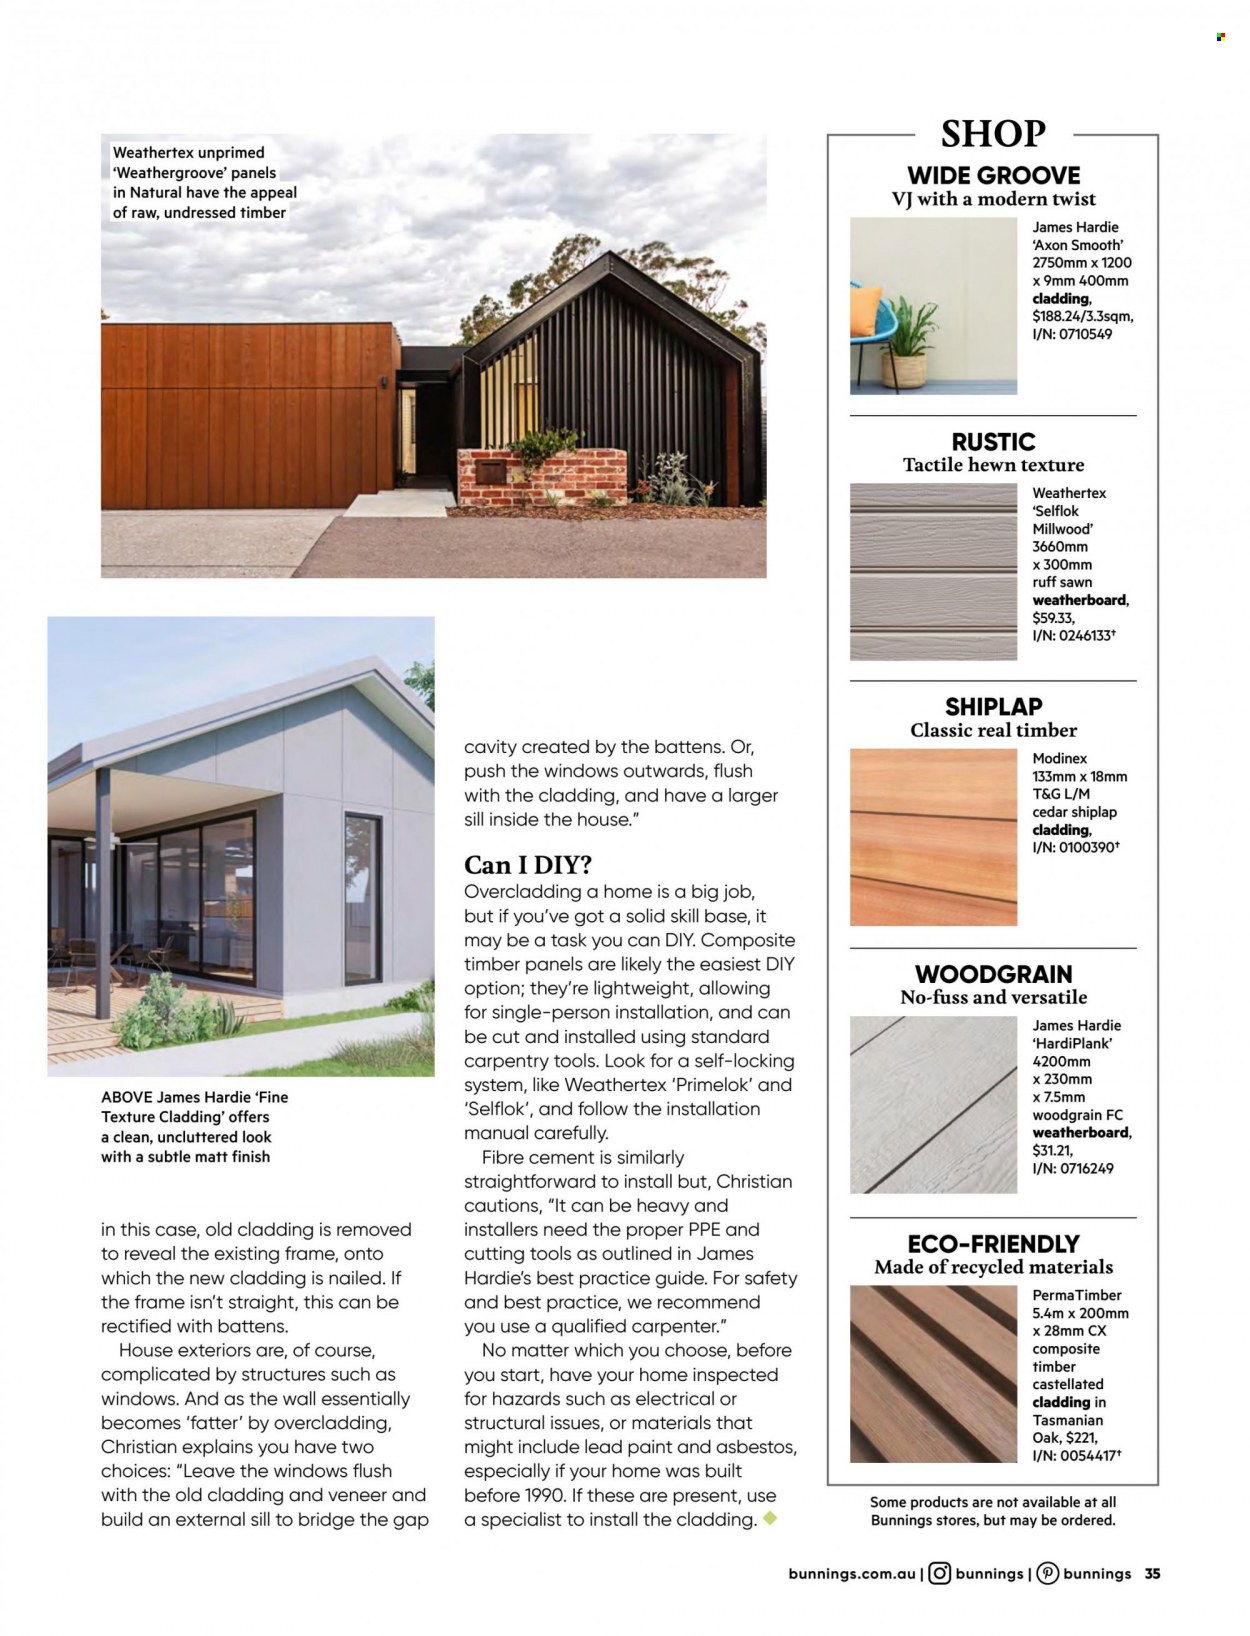 Bunnings Warehouse mailer  - 01.10.2022 - 31.10.2022. Page 35.